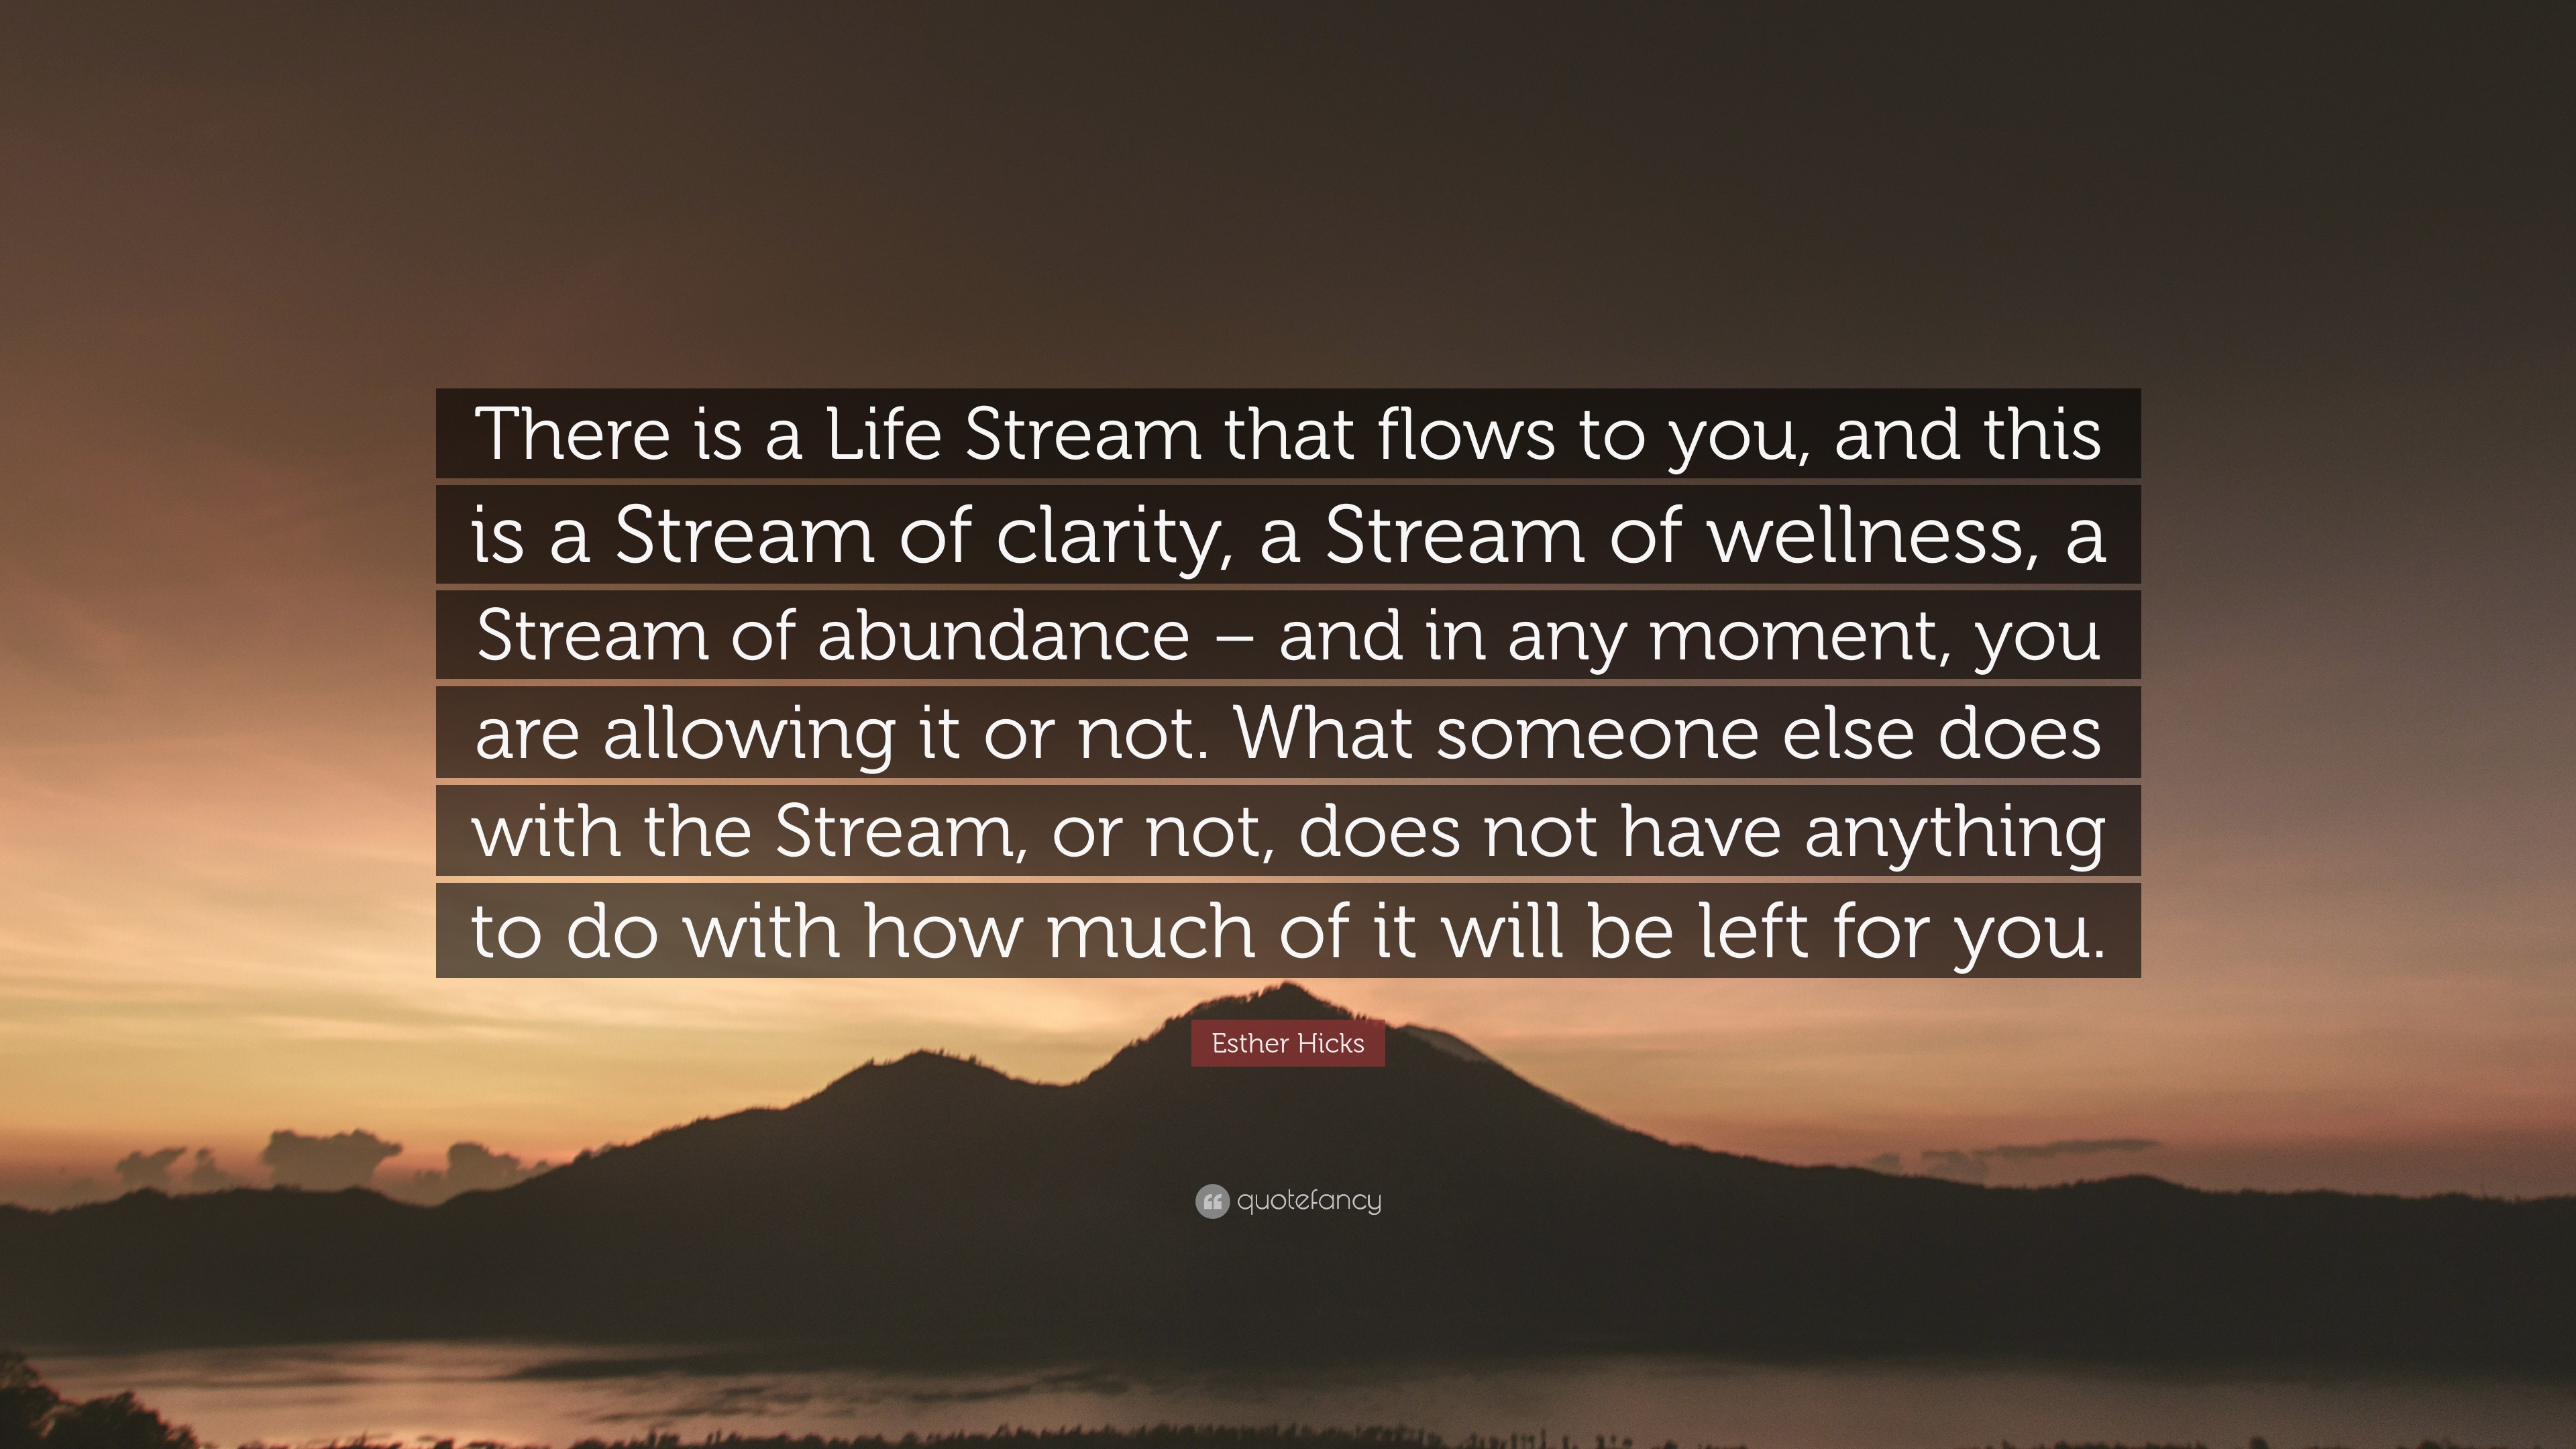 Esther Hicks Quote: “There is a Life Stream that flows to you, and this is  a Stream of clarity, a Stream of wellness, a Stream of abundance –...”